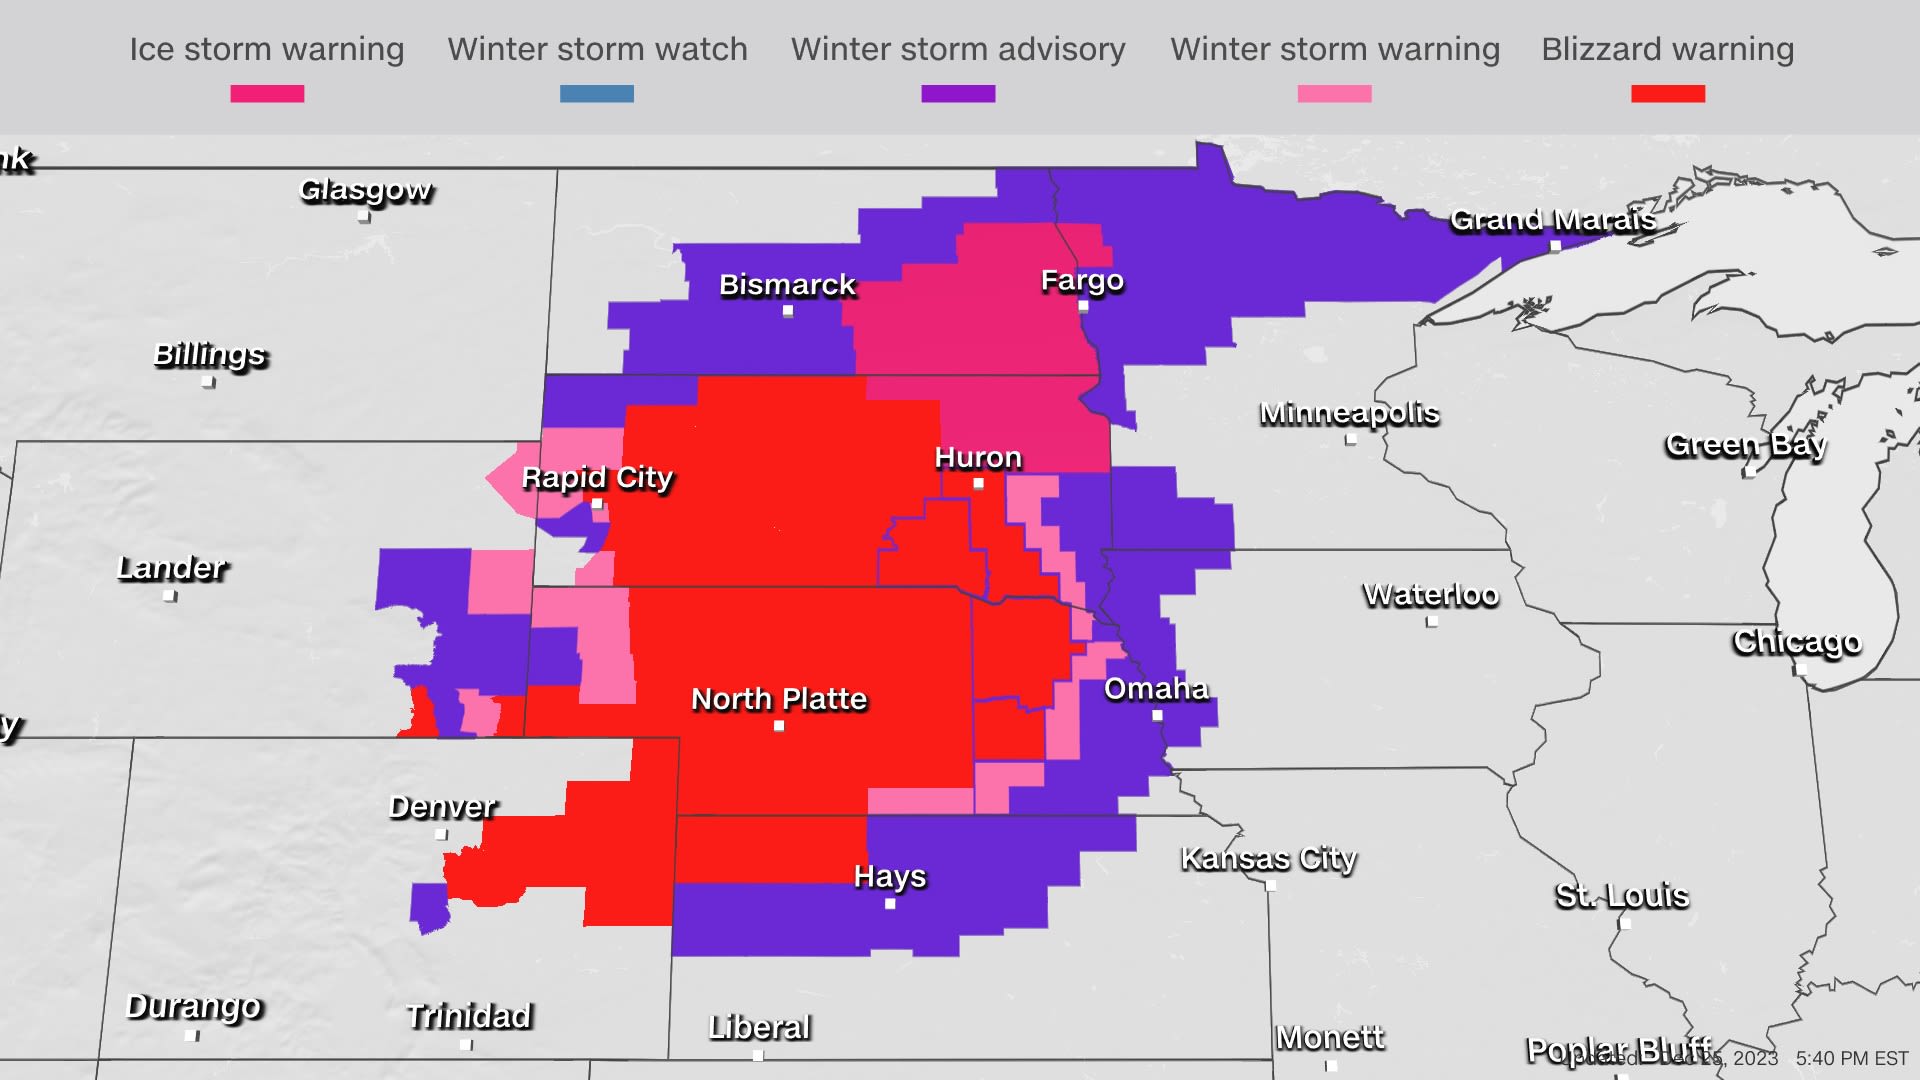 These warnings, watches and advisories were in place Monday afternoon.